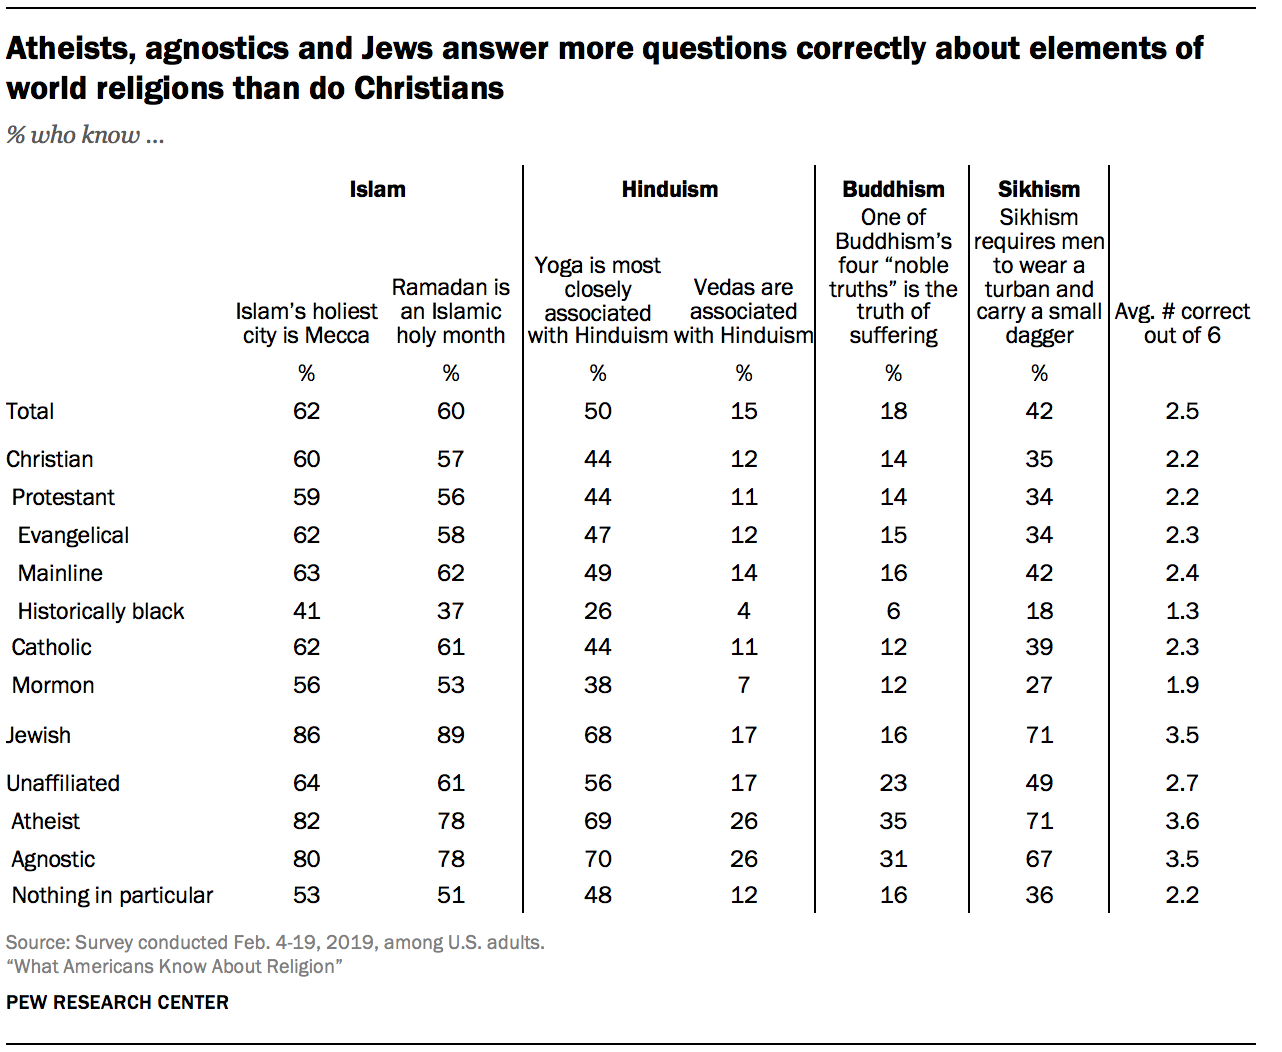 Atheists, agnostics and Jews answer more questions correctly about elements of world religions than do Christians